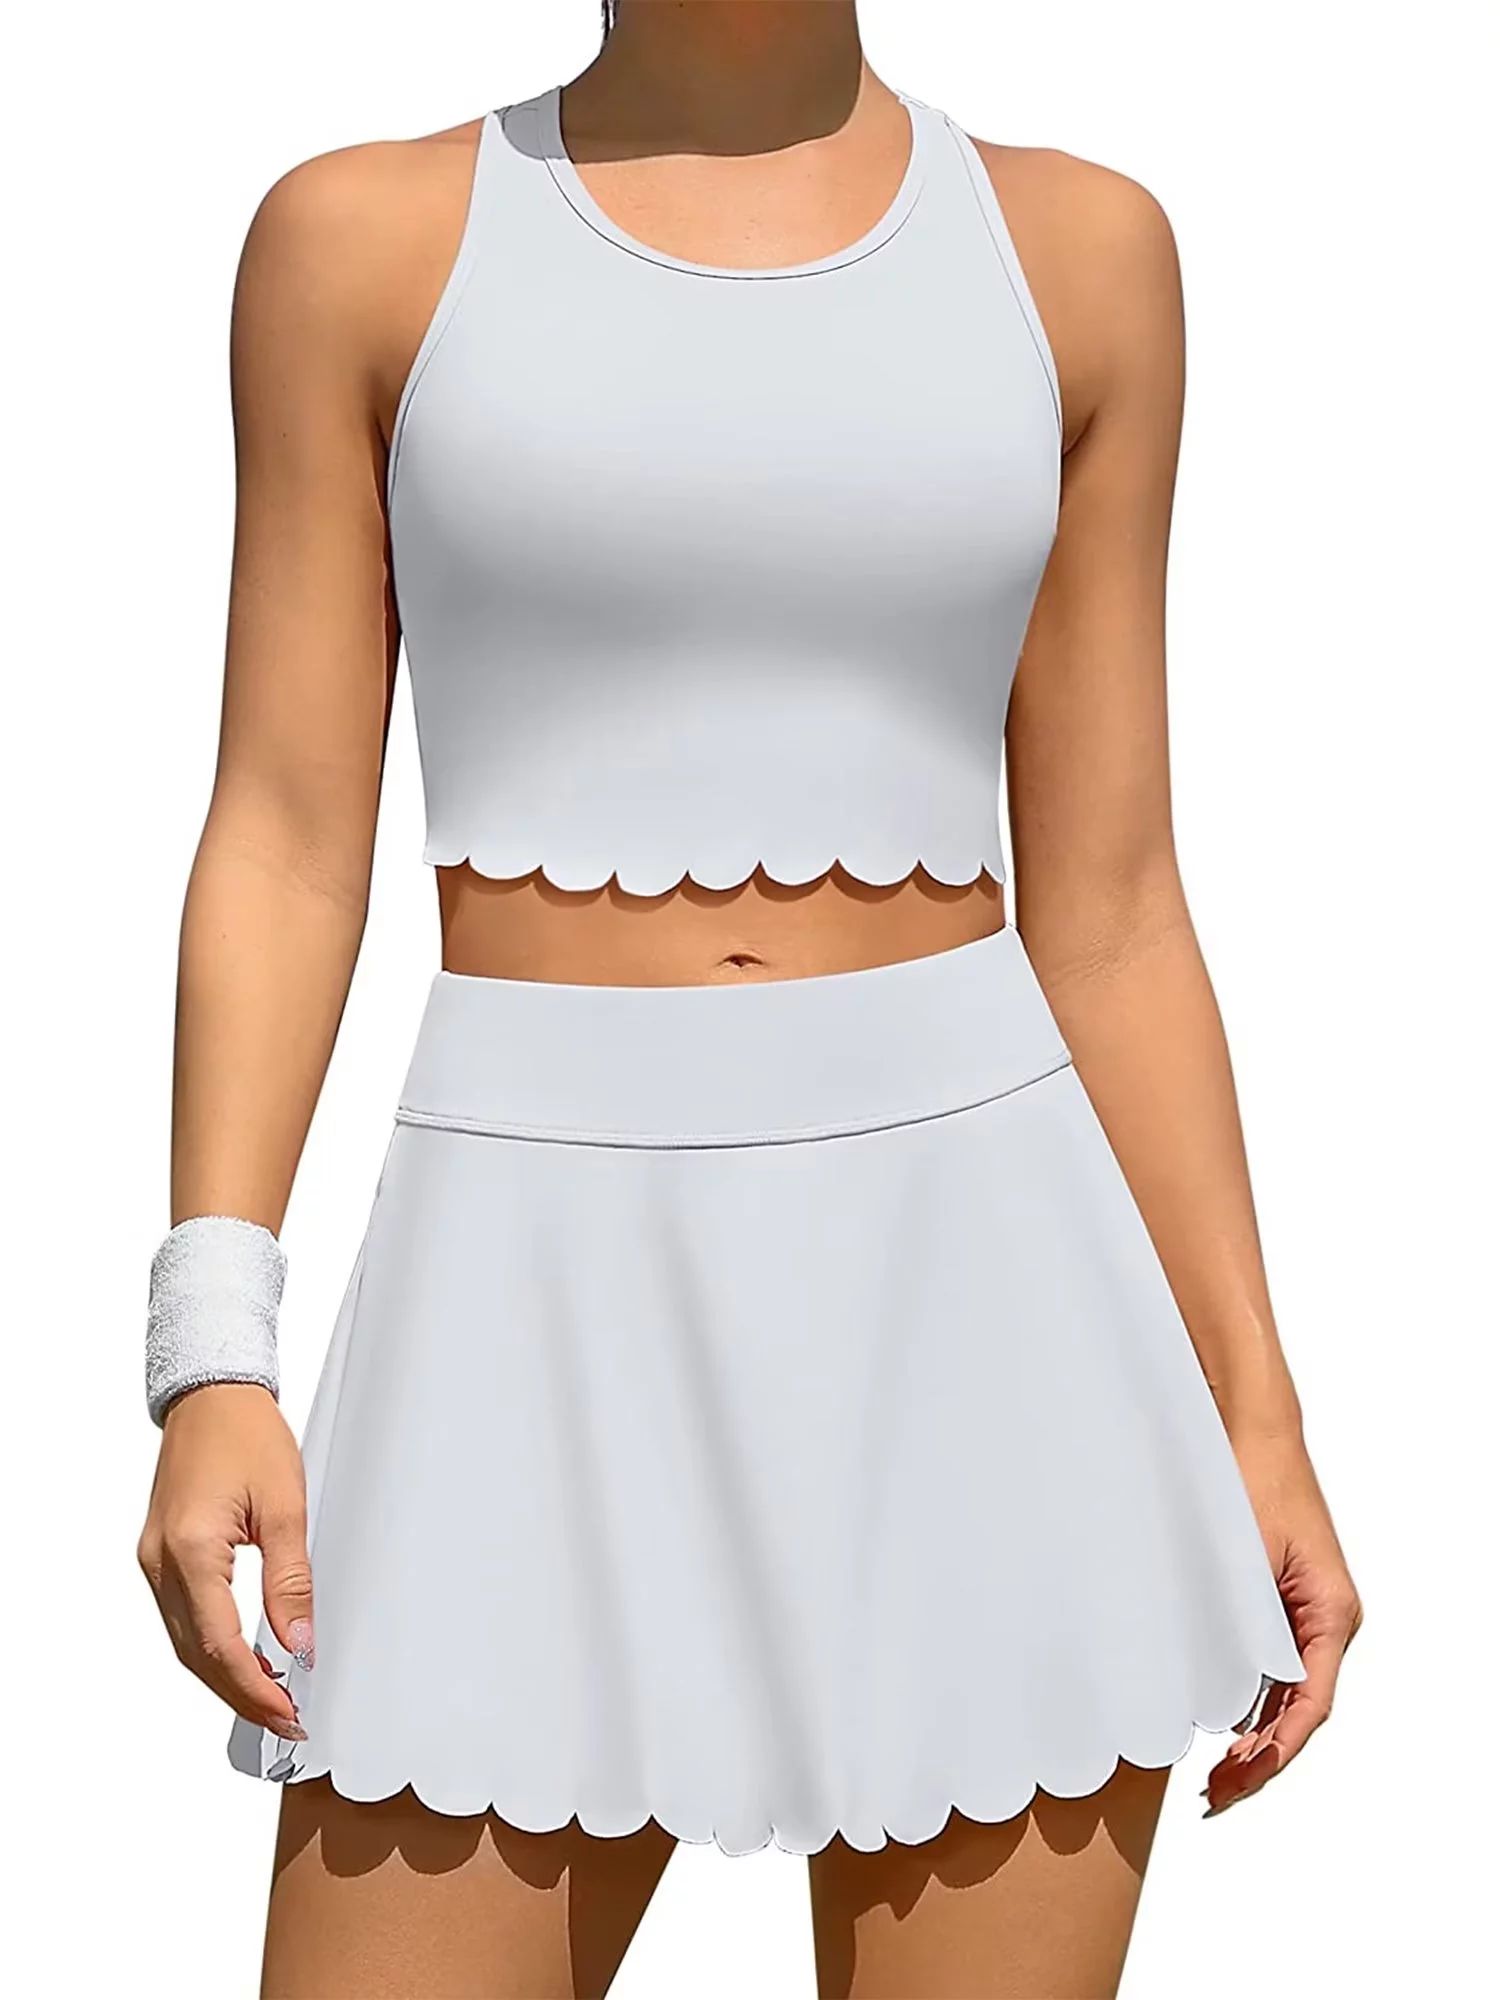 Womens 2 Piece Tennis Skirts Sets Athletic Dress with Bulit-in Shorts and Pockets | Walmart (US)